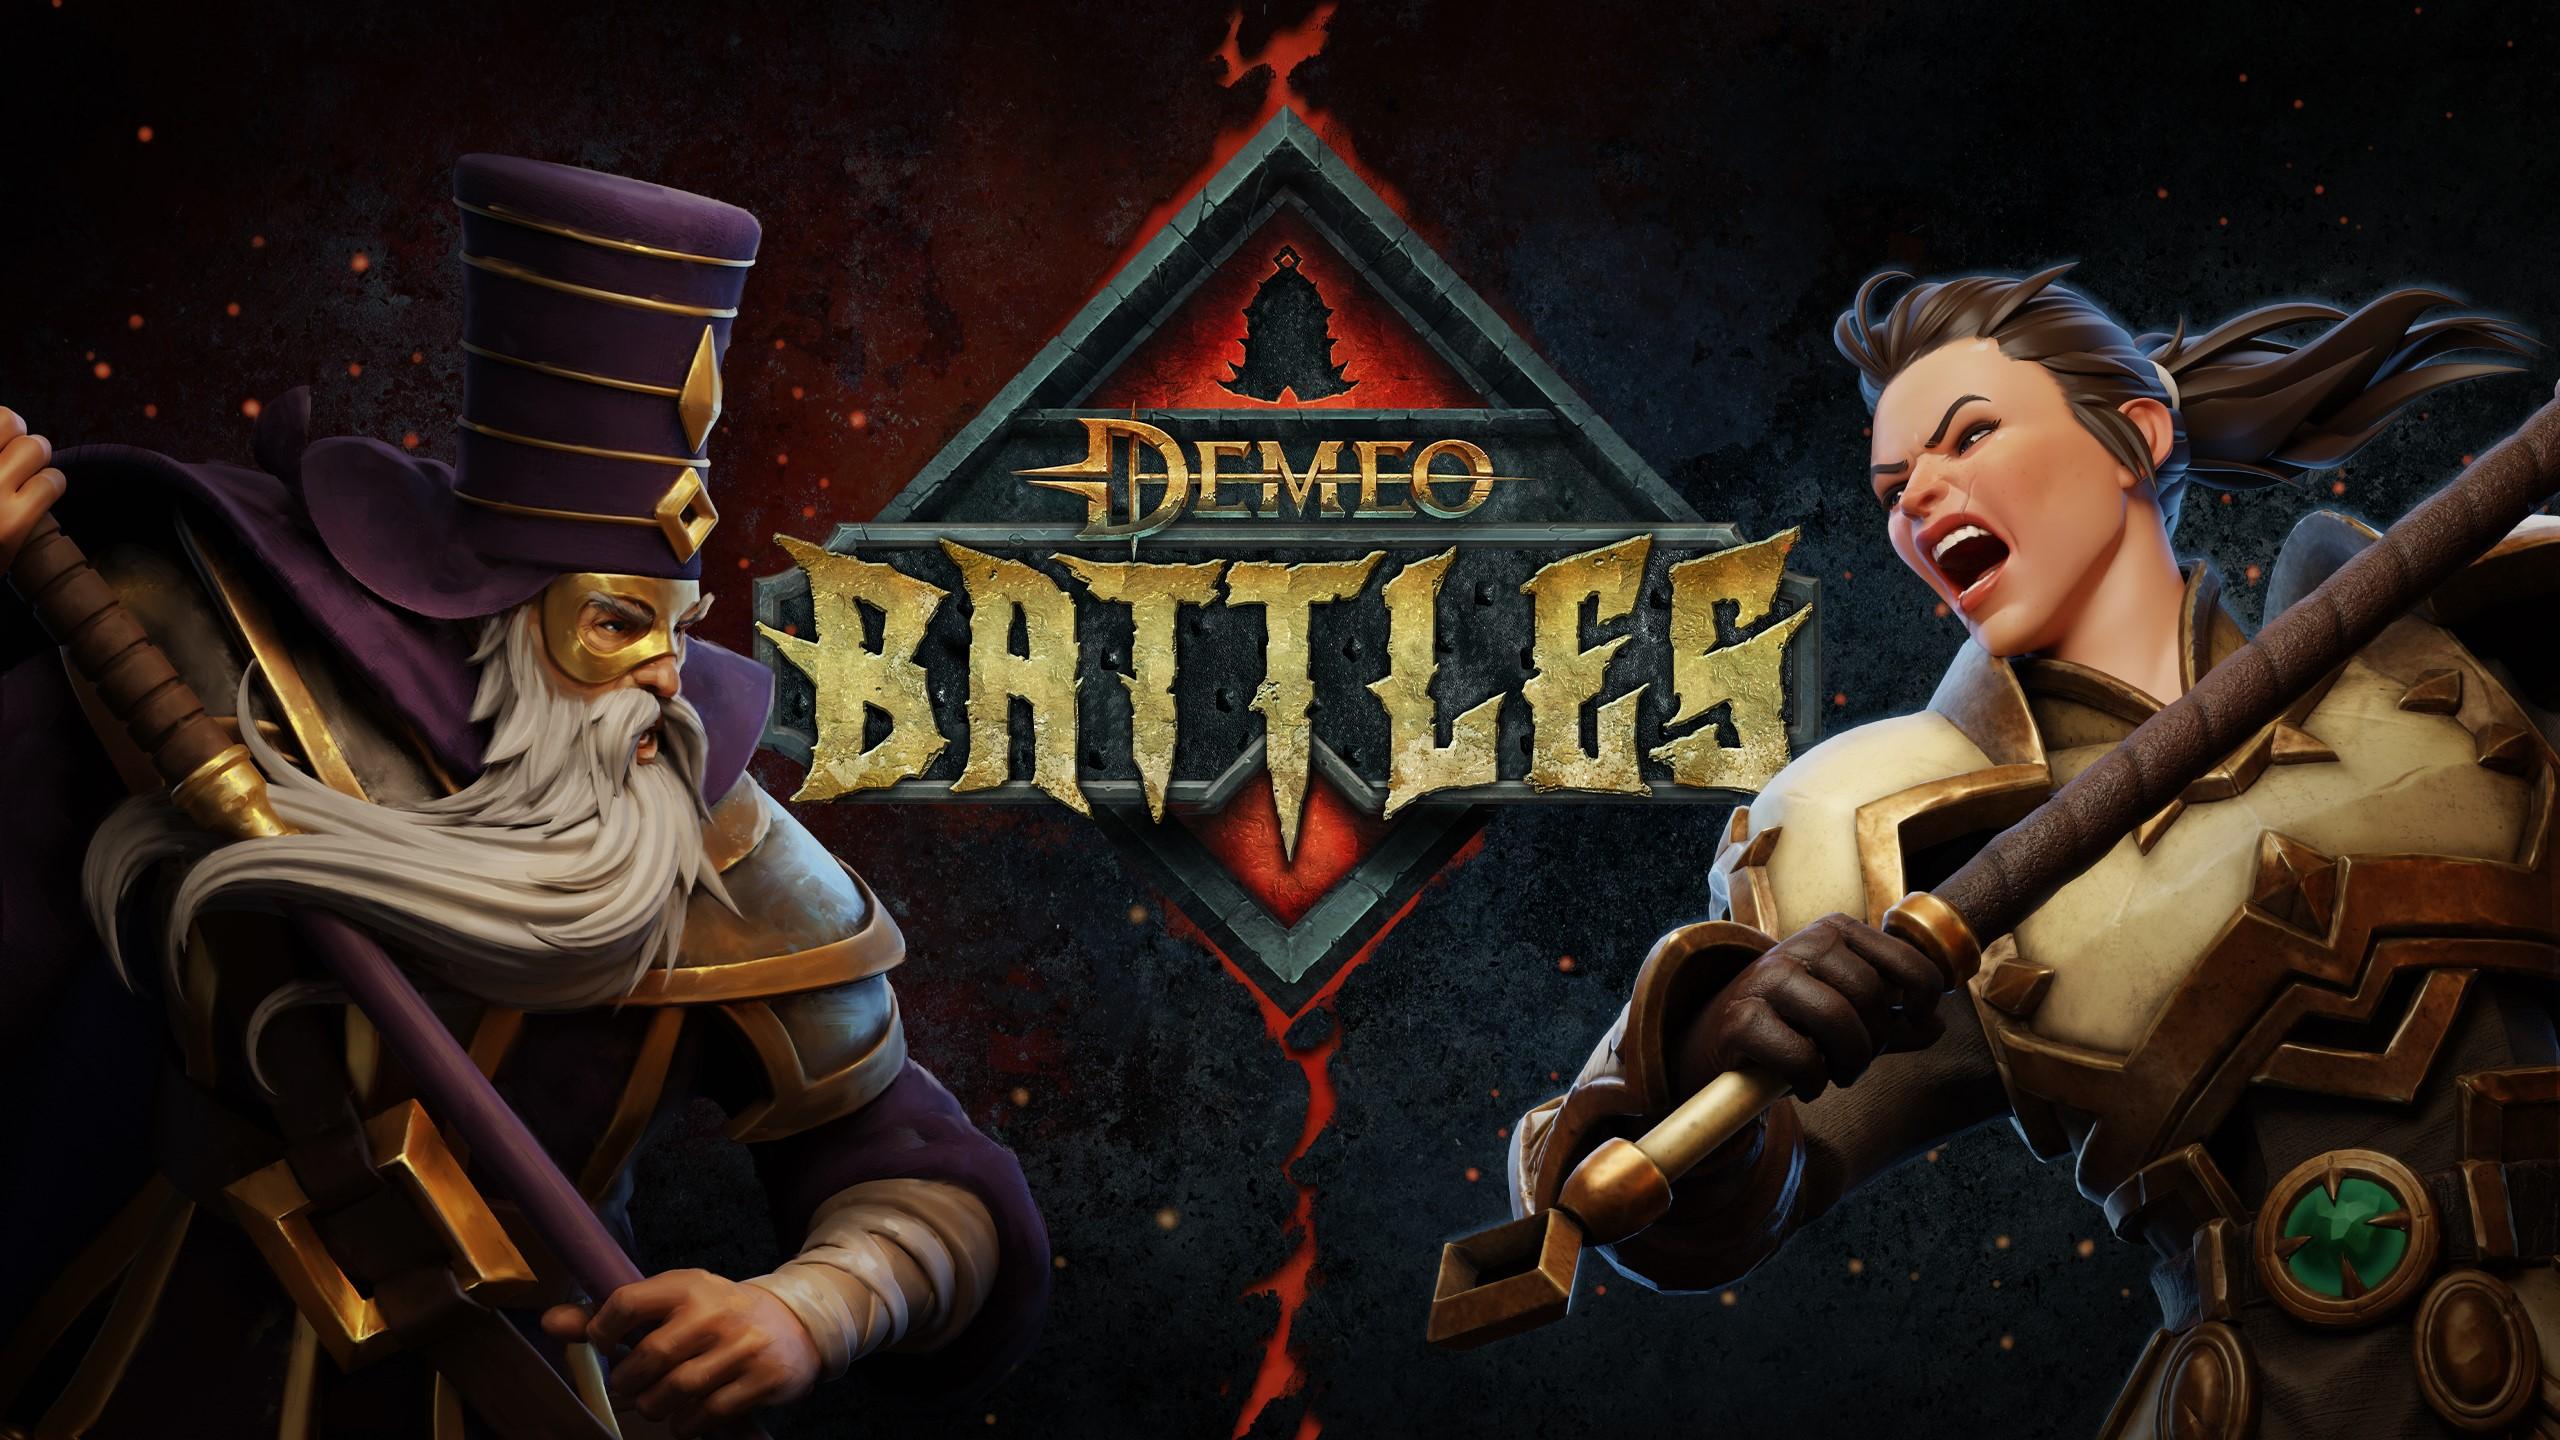 'Demeo Battles' key art showing two champions and the game's logo.